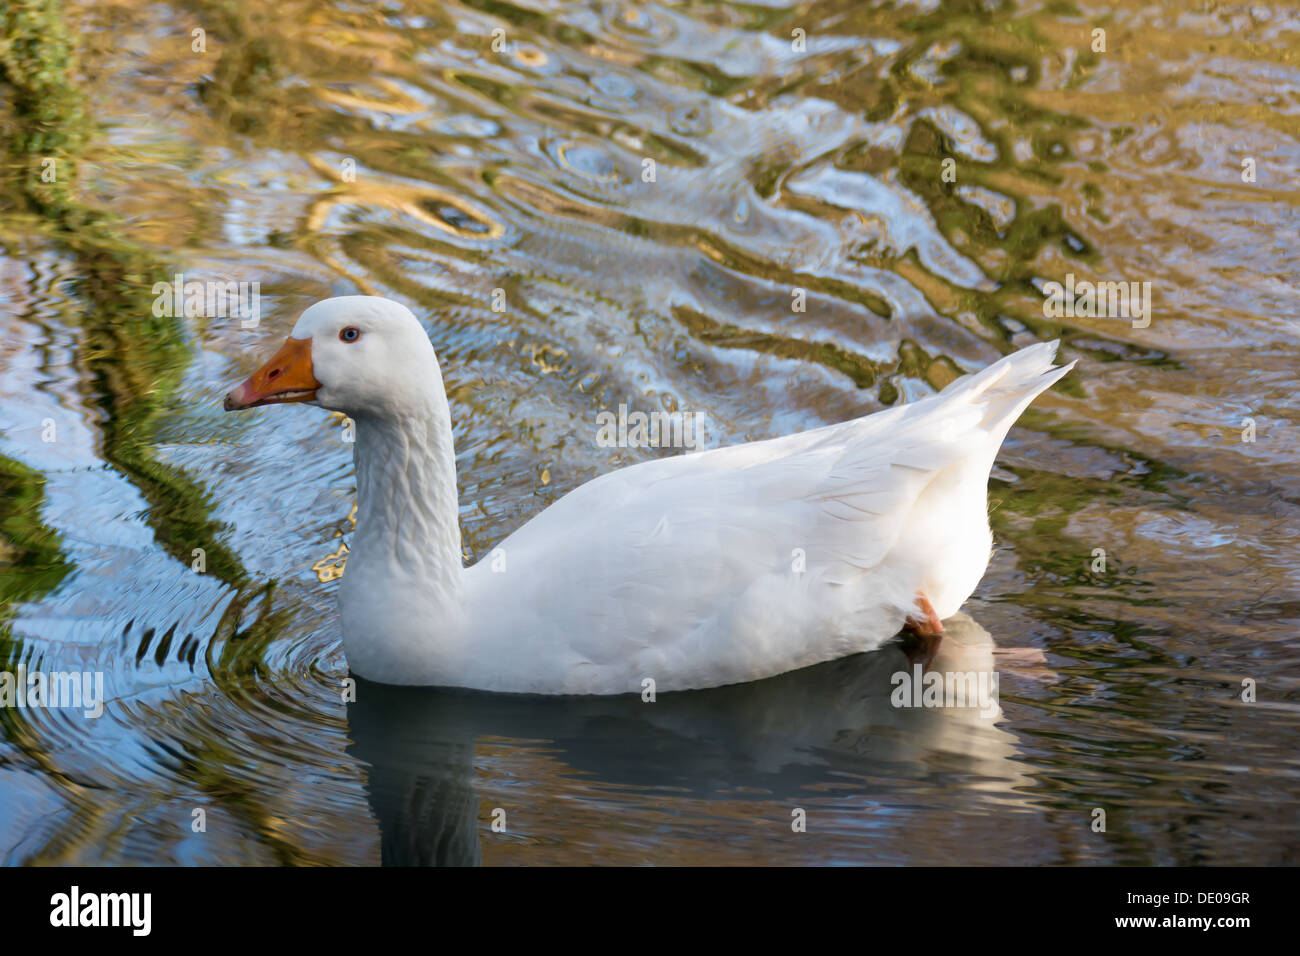 A young goose swimming in an English lake Stock Photo